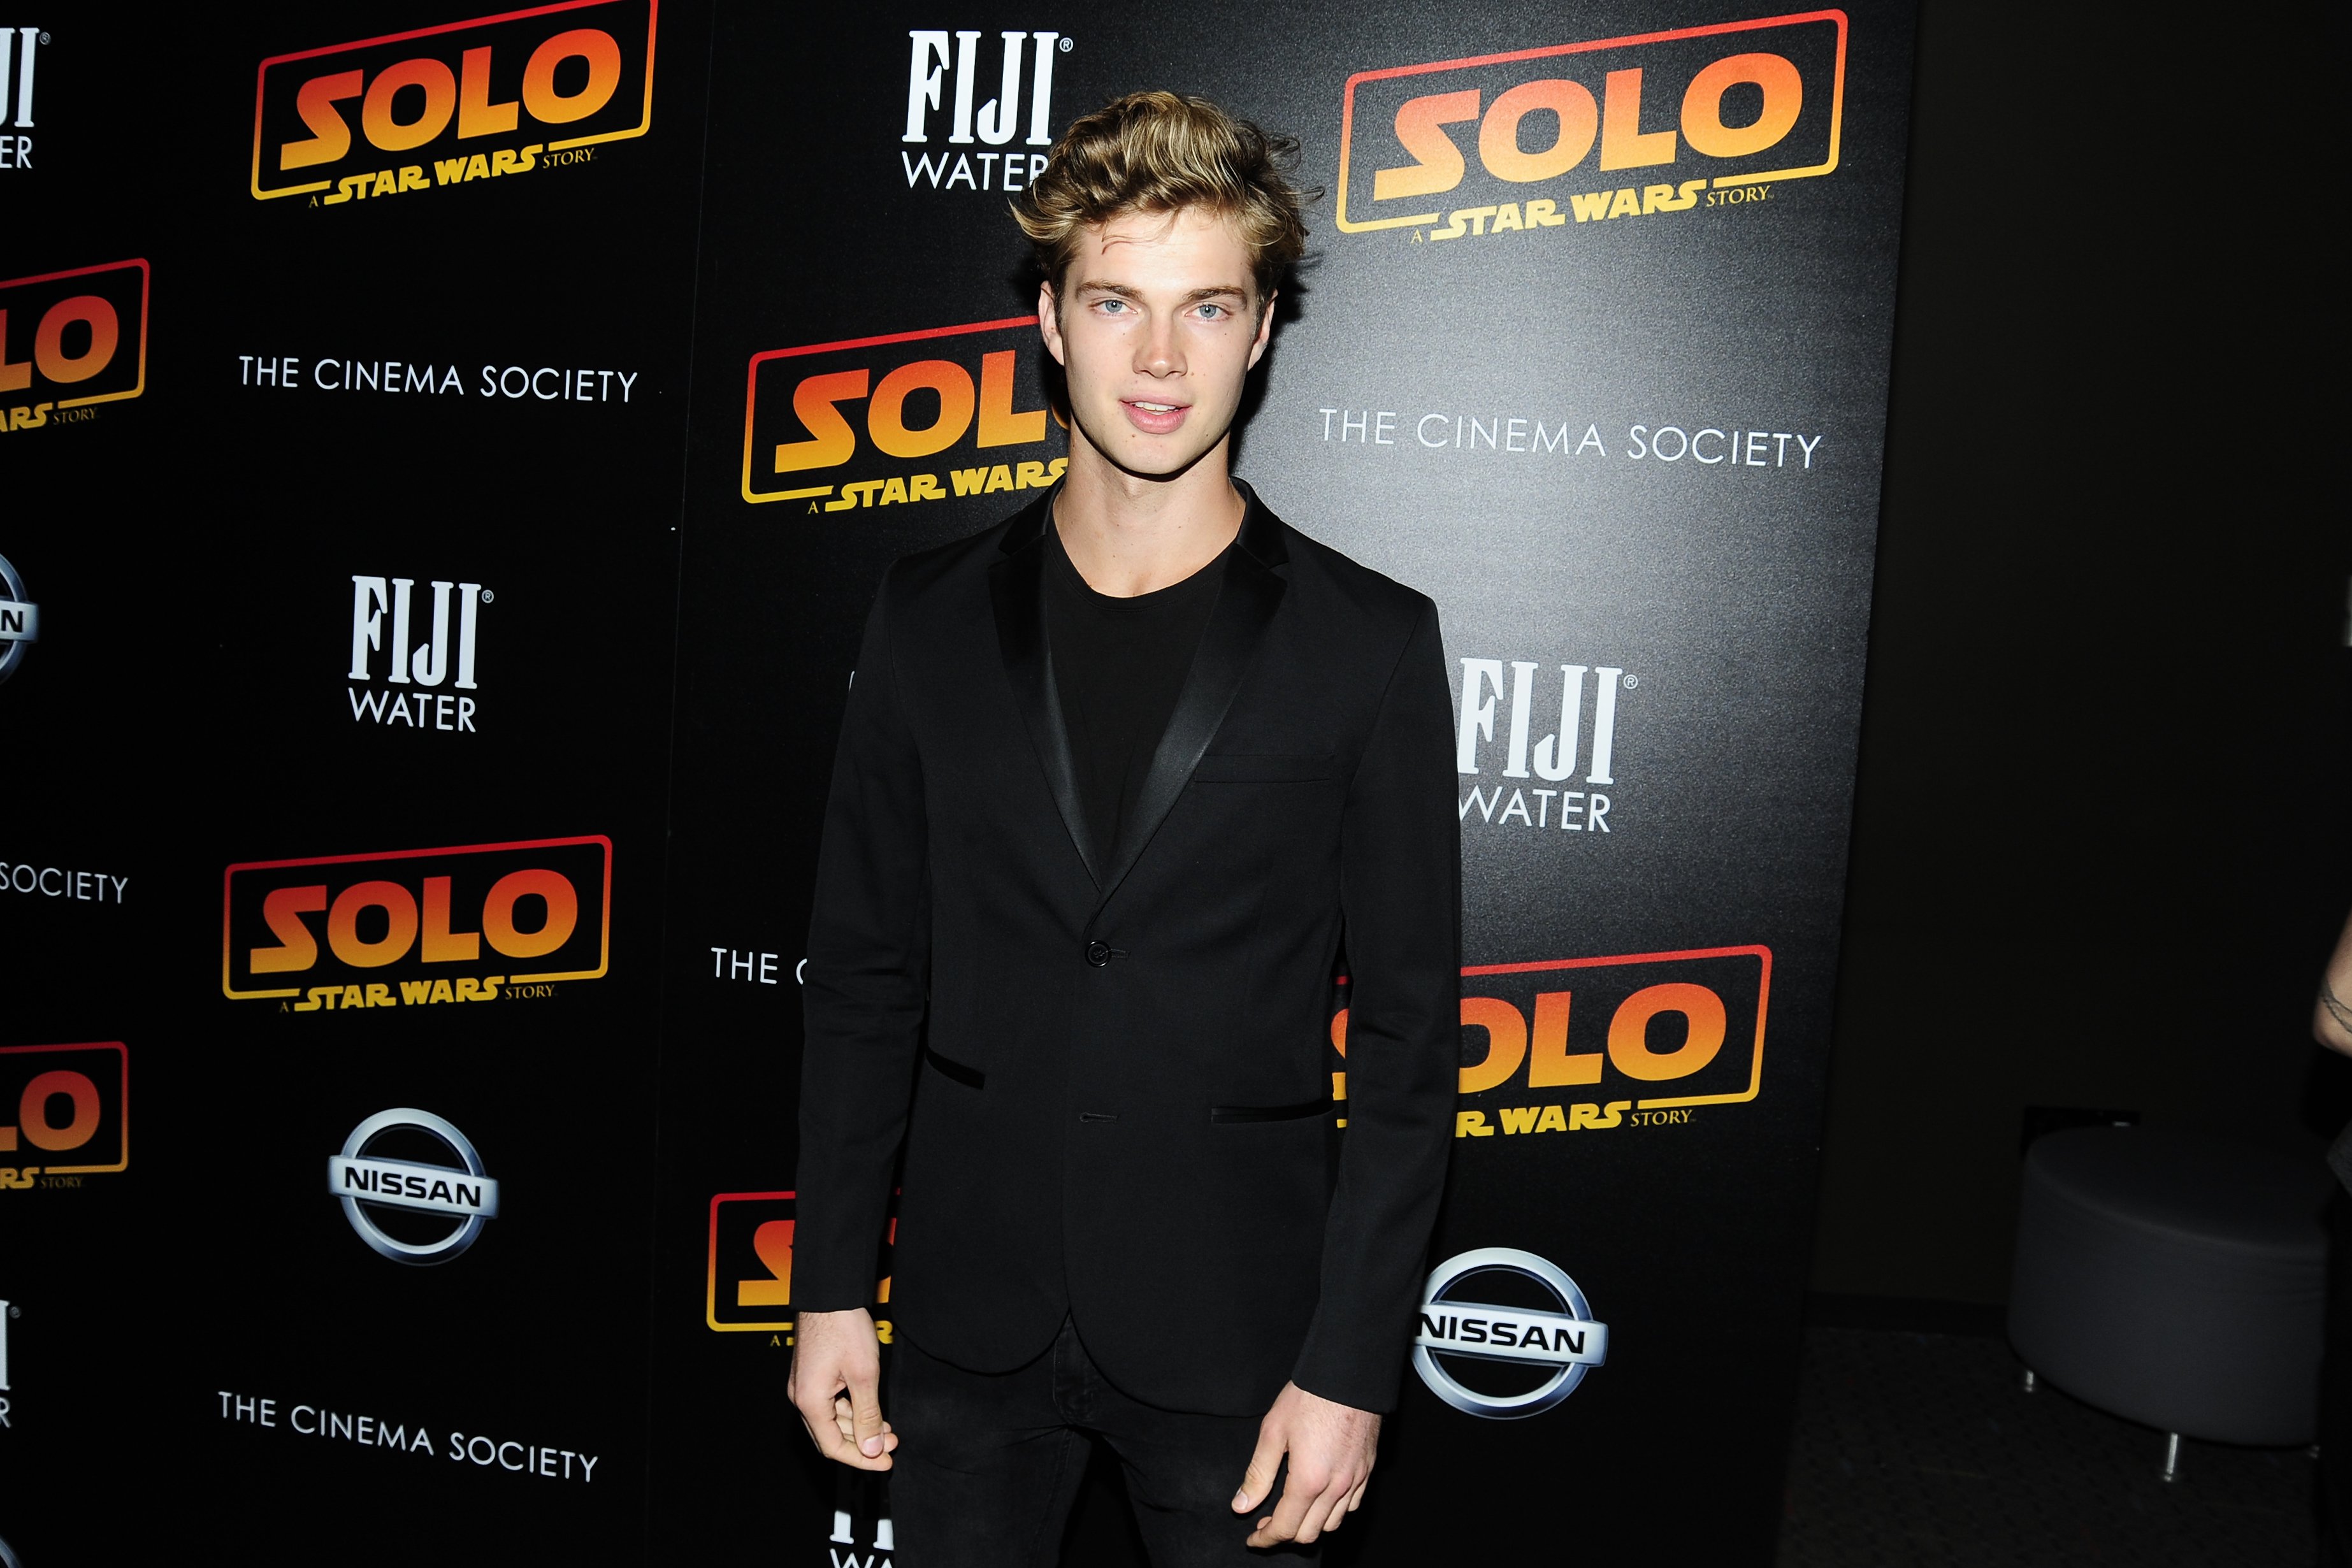 Luke Volker at the screening of "Solo: A Star Wars Story" on May 21, 2018 | Source: Getty Images